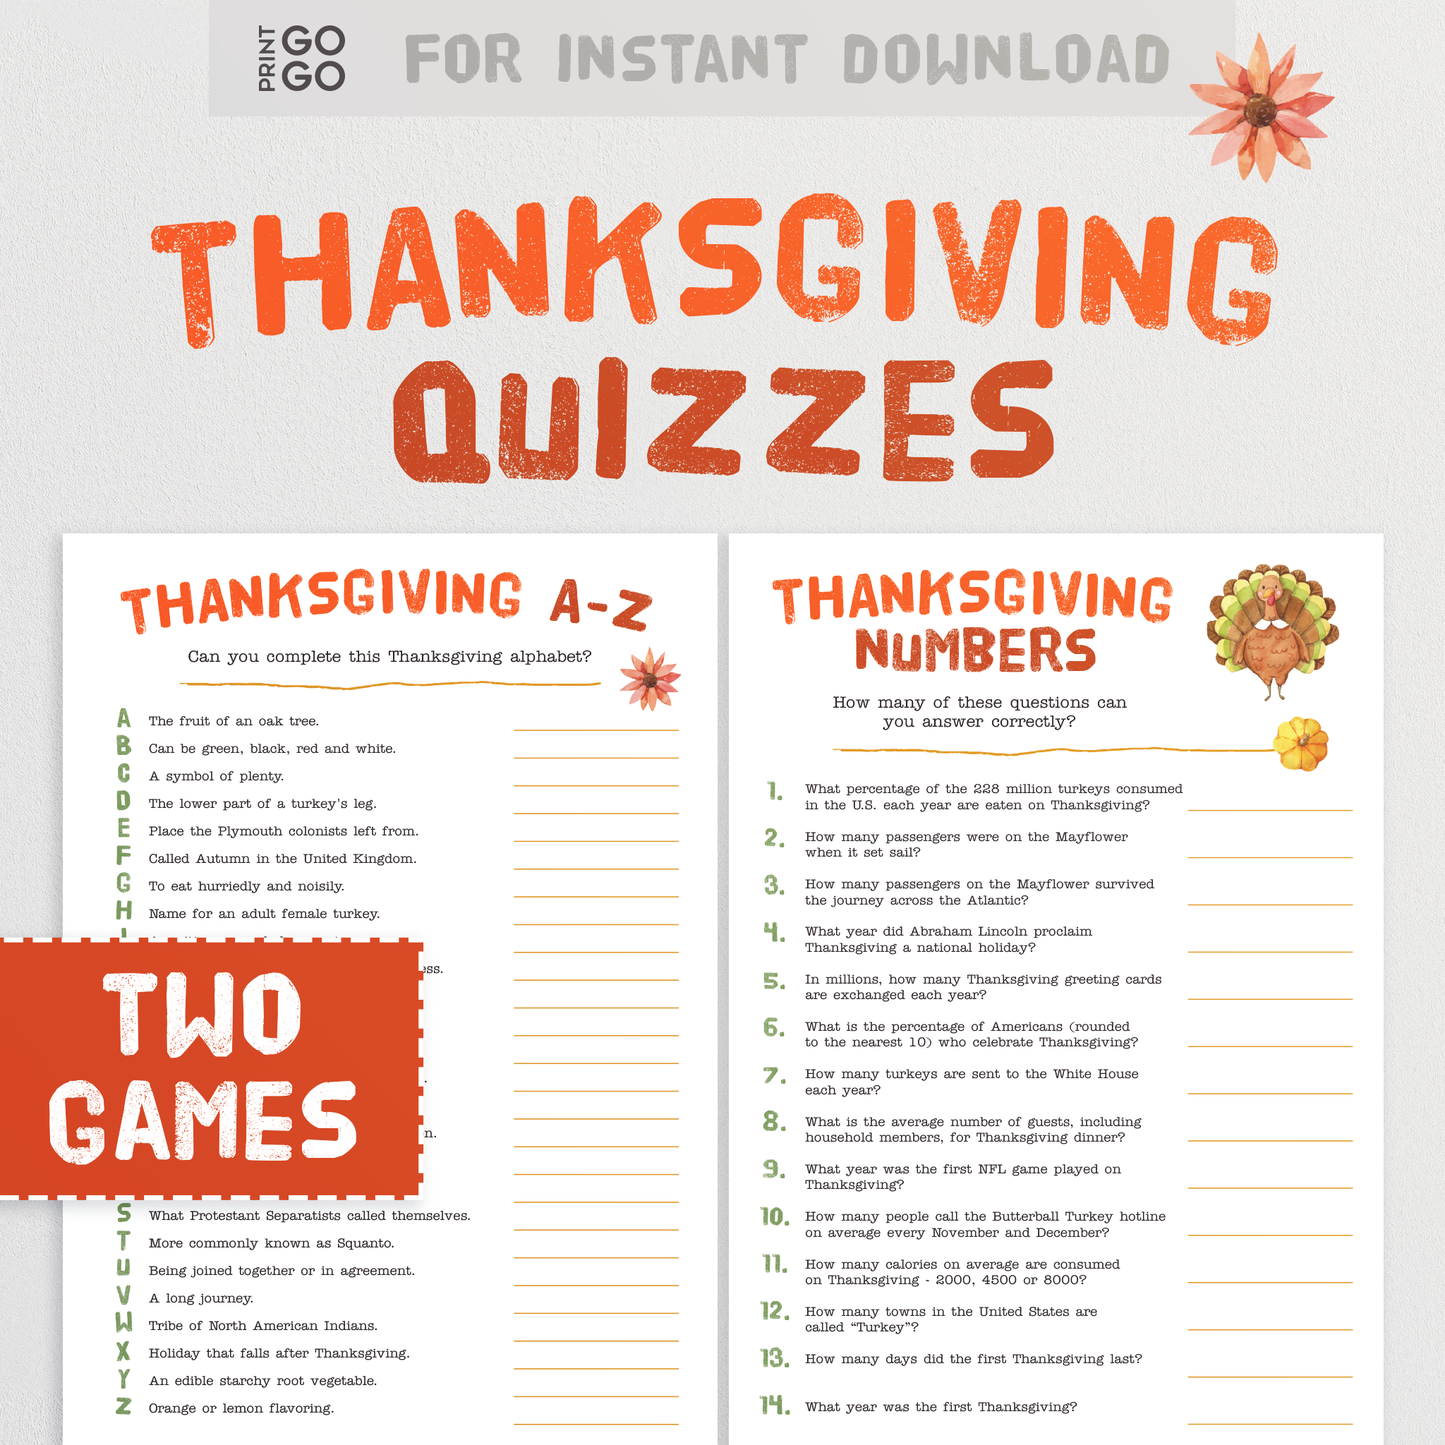 Thanksgiving Trivia Quizzes - Test Your Holiday Knowledge With These Fun Family Quiz Party Games | USA Holiday Quiz Questions for Groups